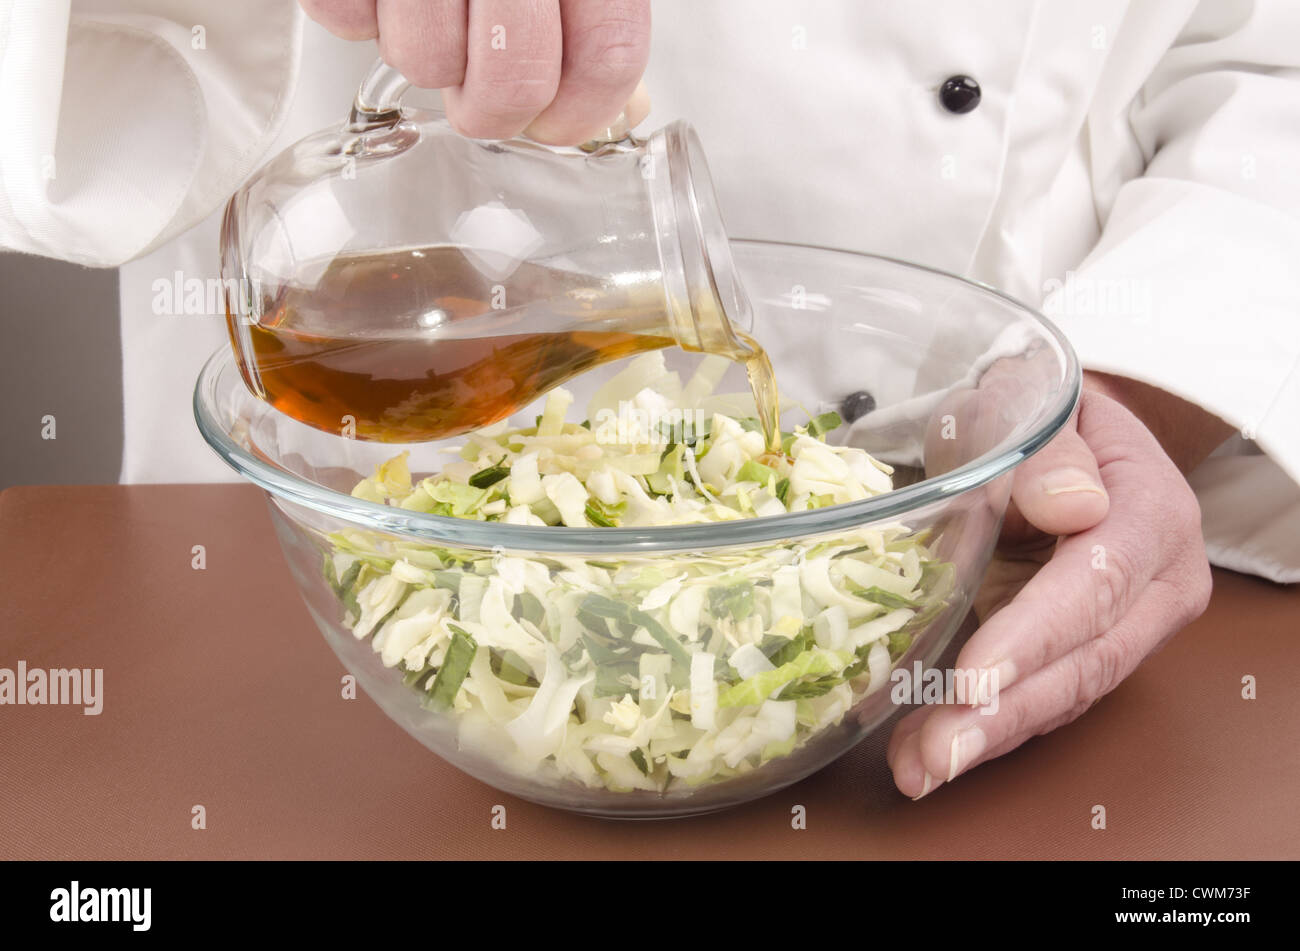 female chef fills some sunflower oil into a salad Stock Photo